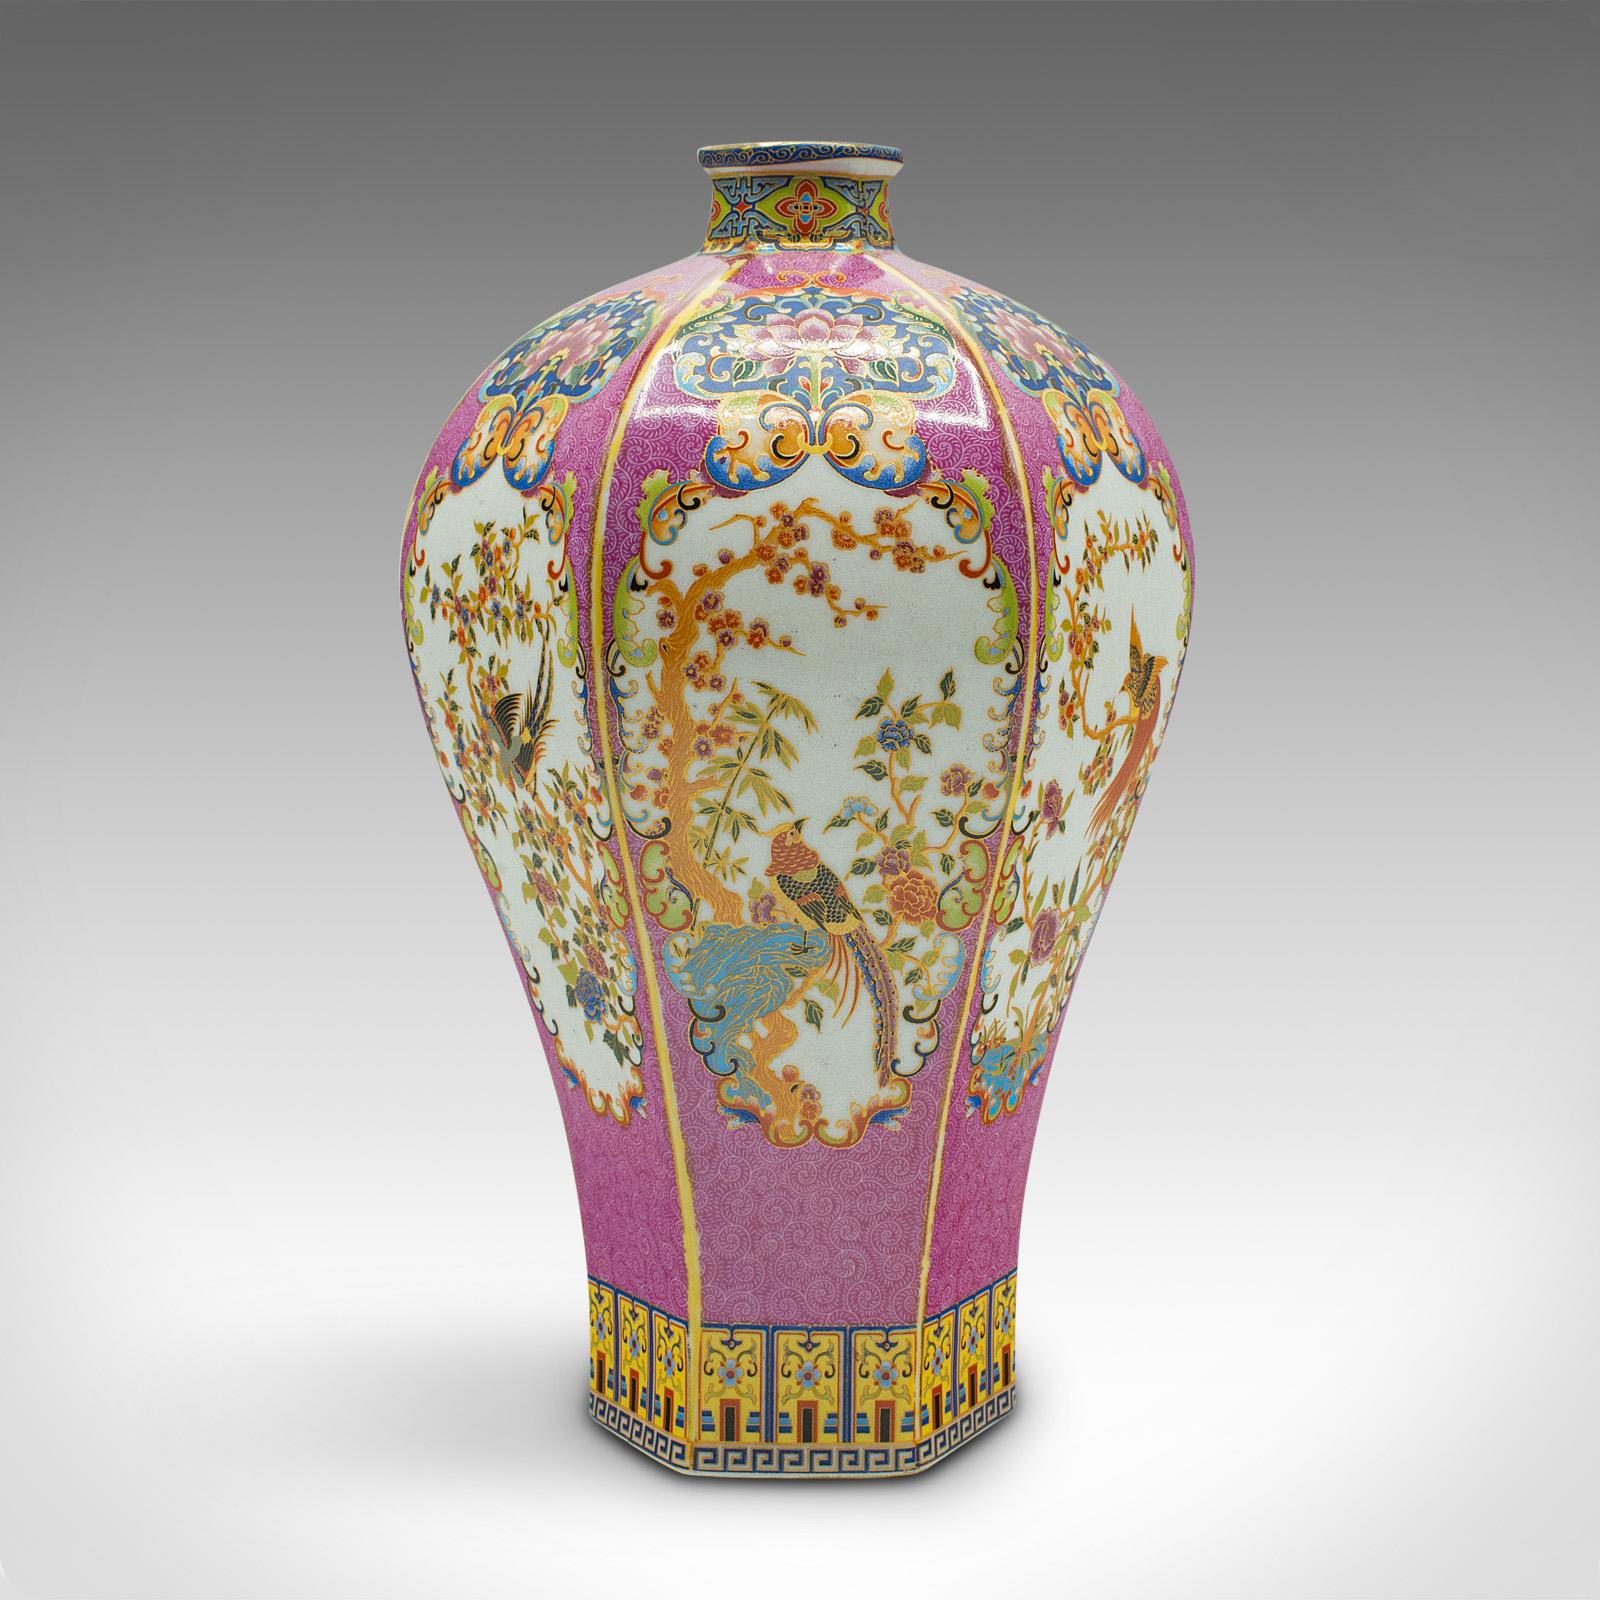 This is an antique hexagonal posy vase. A Chinese, ceramic baluster urn, dating to the late Victorian period, circa 1900.

A treat of fine colour and a fascinating hexagonal form
Displays a desirable aged patina and in good order
Bulbous